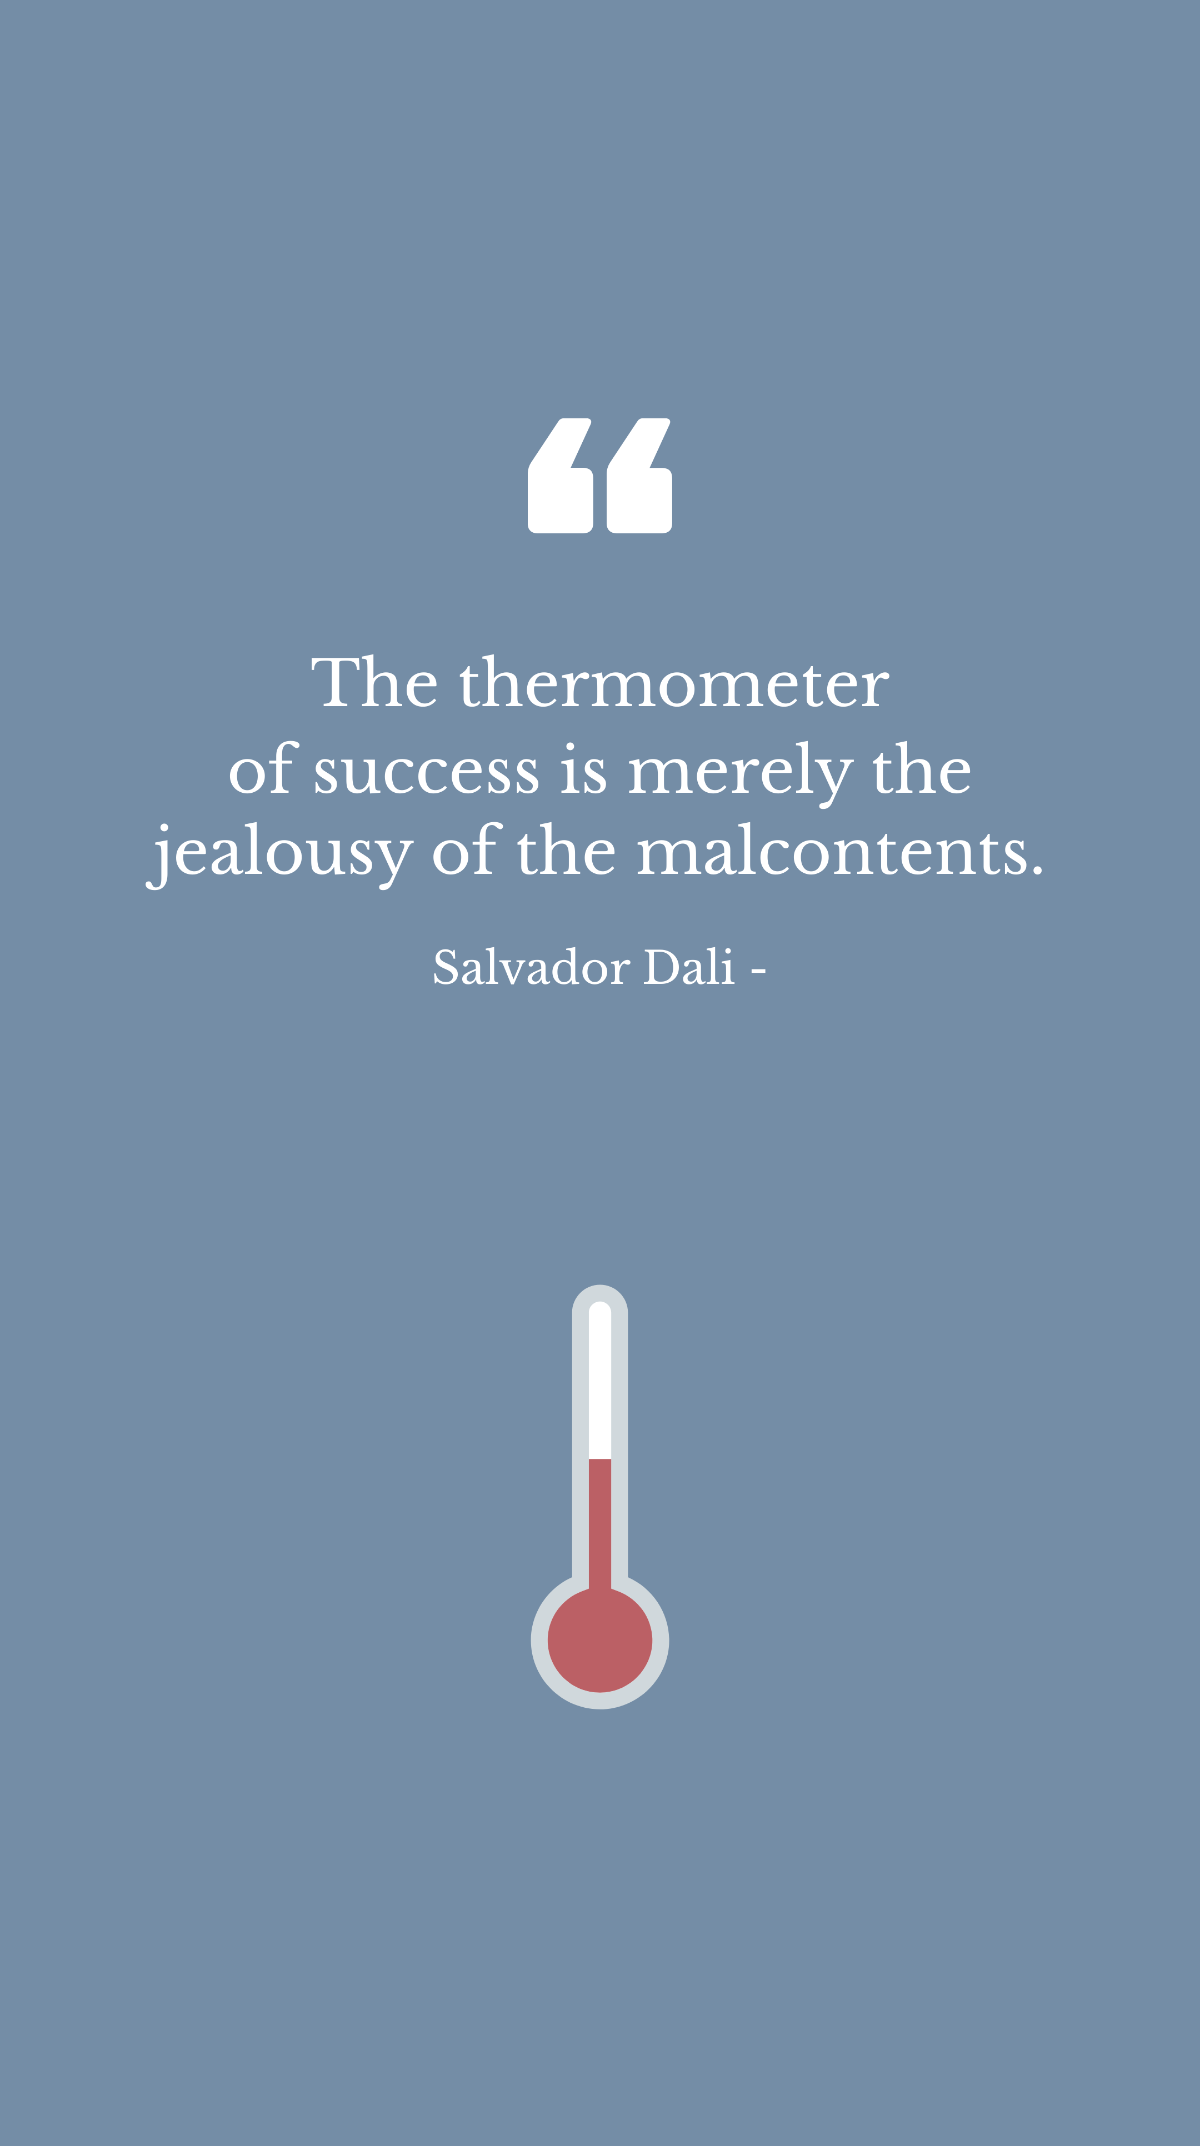 Salvador Dali - The thermometer of success is merely the jealousy of the malcontents. Template